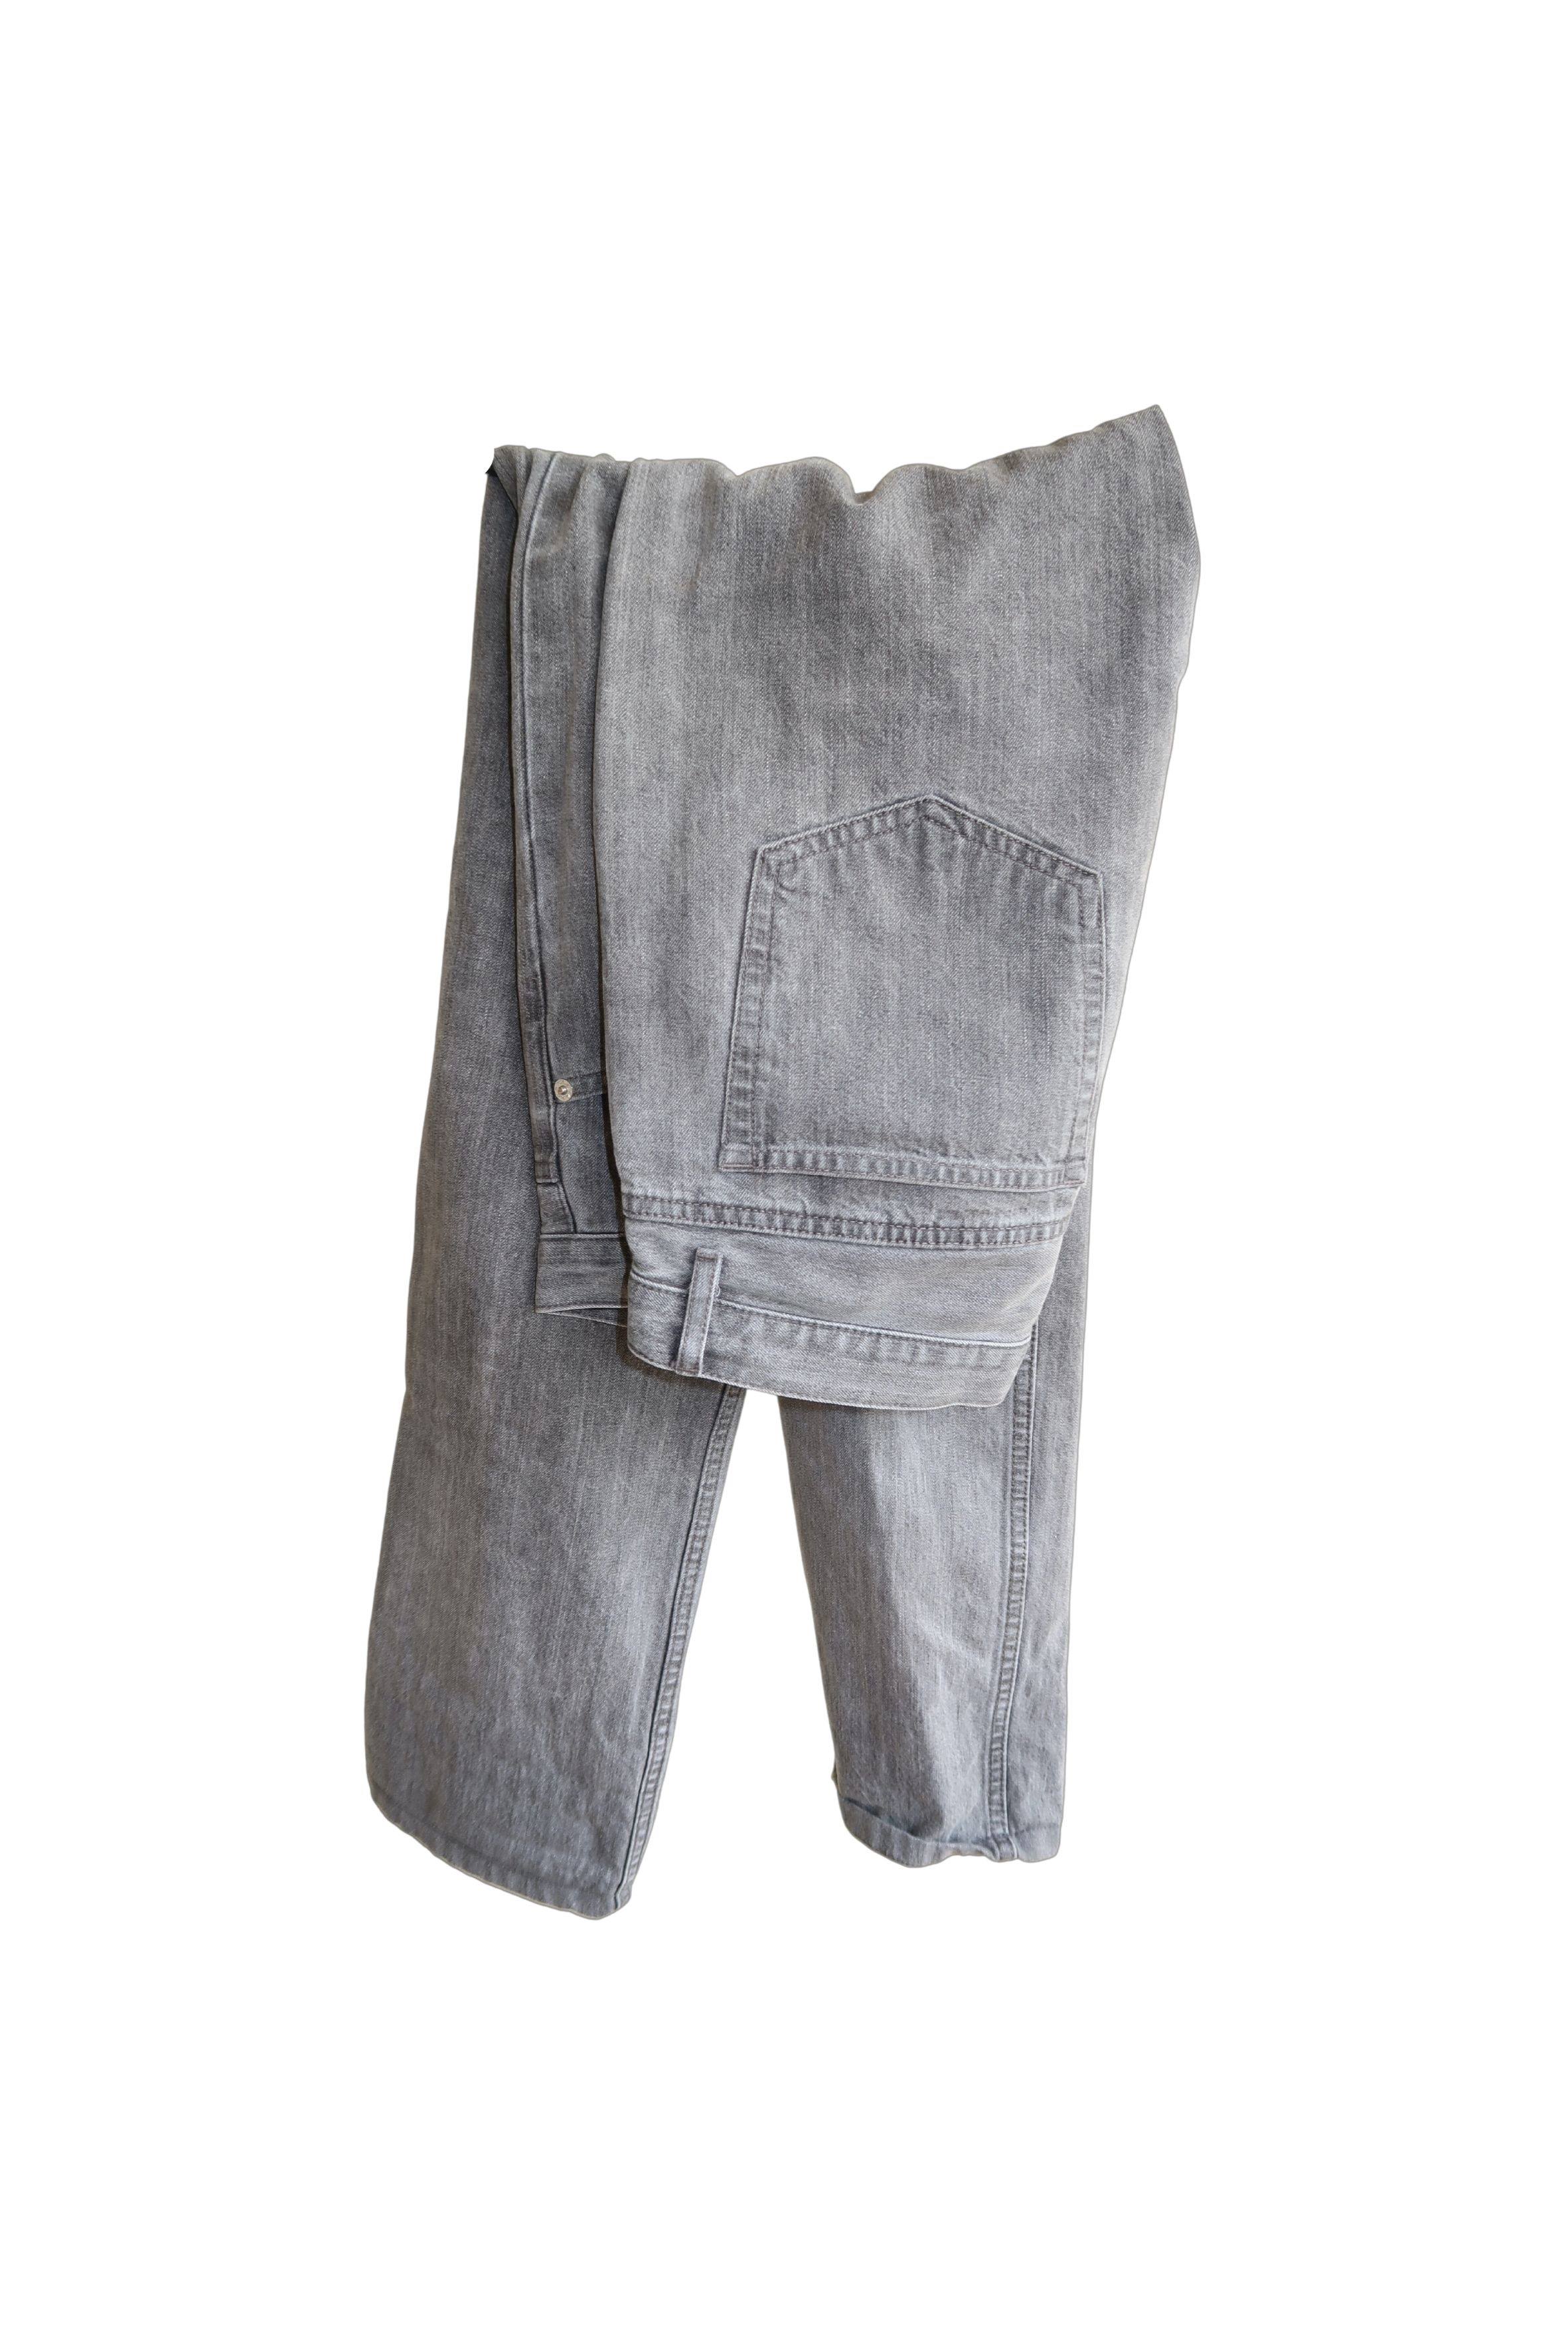 APC Jeans Washed Grey